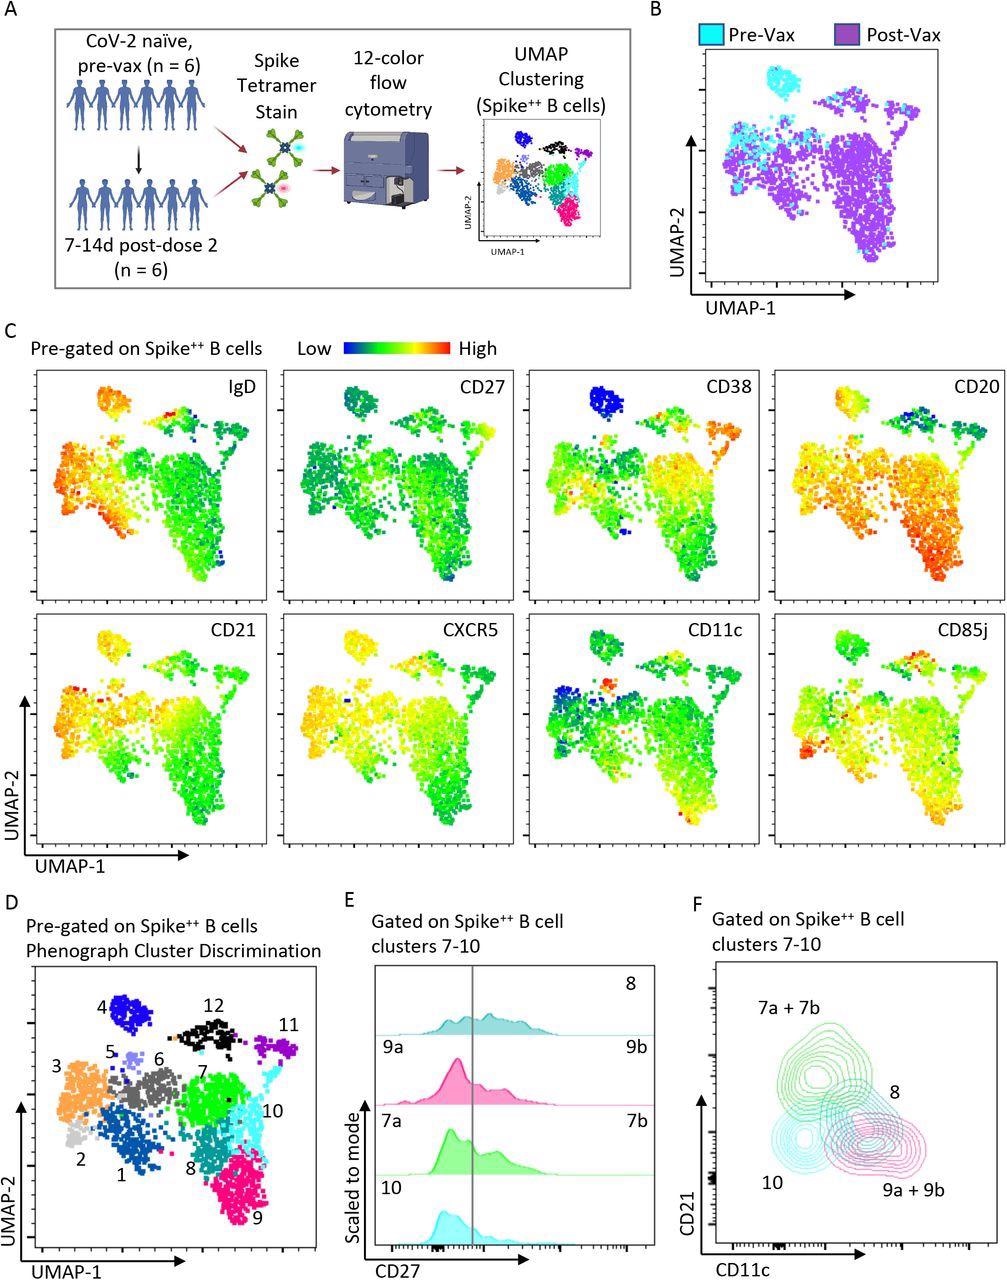 Heterogeneous spike-specific B cells emerge following mRNA vaccination. A) Pictorial overview of initial flow cytometry studies using spike-specific probes and unbiased clustering. B) UMAP dimensionality reduction displaying all Spike-specific B cells from previously unexposed, healthy individuals (n=6) and paired post-vaccination dose #2 (n=6) from the same individuals. The plot is color coordinated based on timepoints of pre-vaccination (Pre-Vax) and post-vaccination (Post-Vax). C) Heatmap overlays of the same UMAP from figure B displaying the relative expression patterns of IgD, CD27, CD38, CD20, CD21, CXCR5, CD11c, and CD85j. D) Overlay of color-coordinated clusters among Spike-specific B cells discriminated using Phenograph. E) Histograms displaying relative contributions from double-negative B cells (CD27Negative) and switched memory B cells (CD27+) among Phenograph clusters 7 through 10. F) Overlaid contour plots of clusters 7 through 10 displaying a relative expression of CD21 and CD11c.